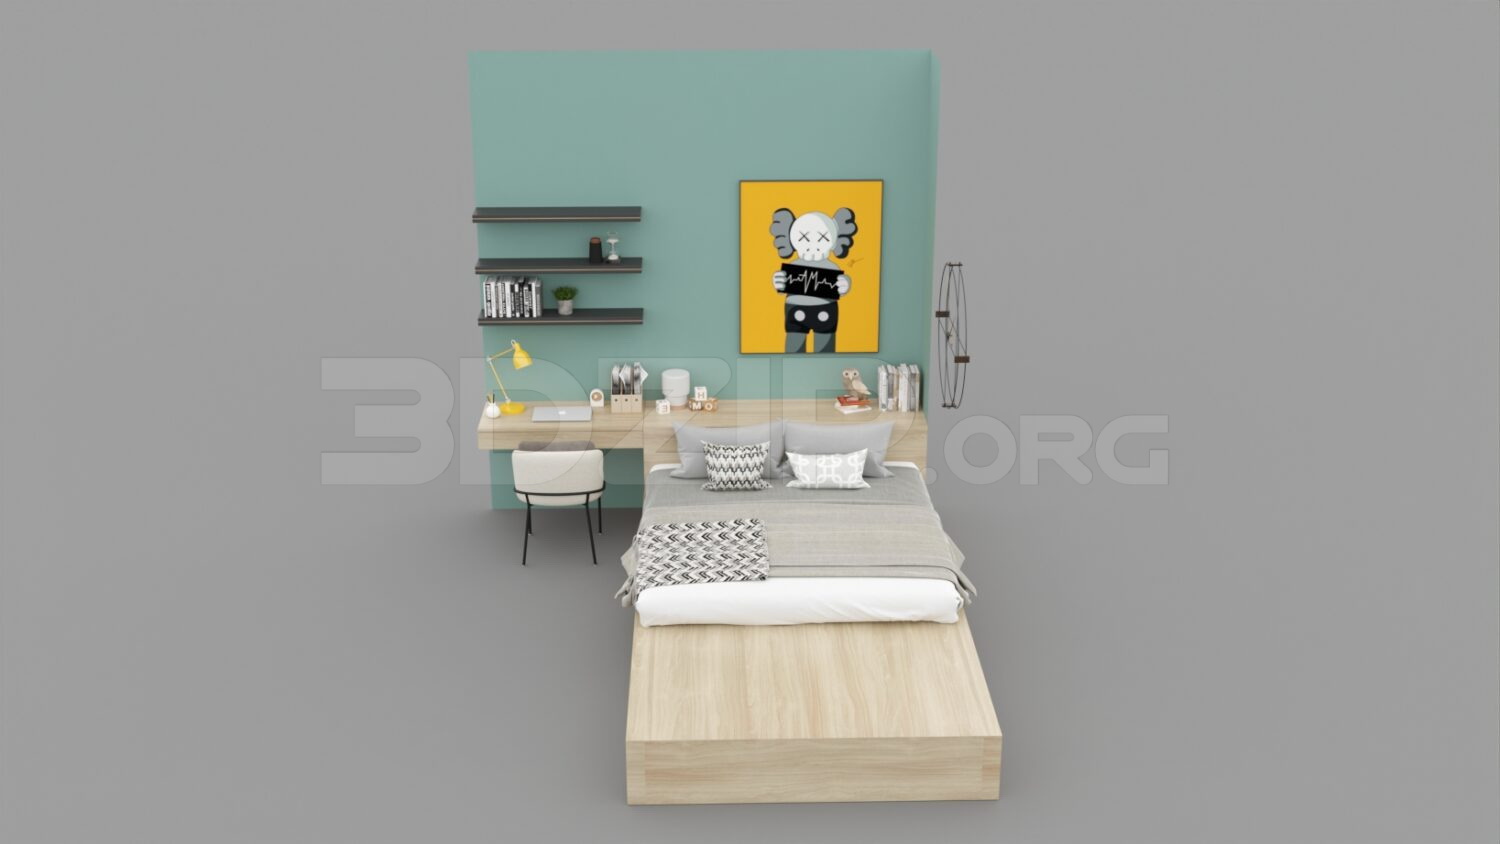 2454. Download Free Bed Model By Nguyen Ngoc Tung